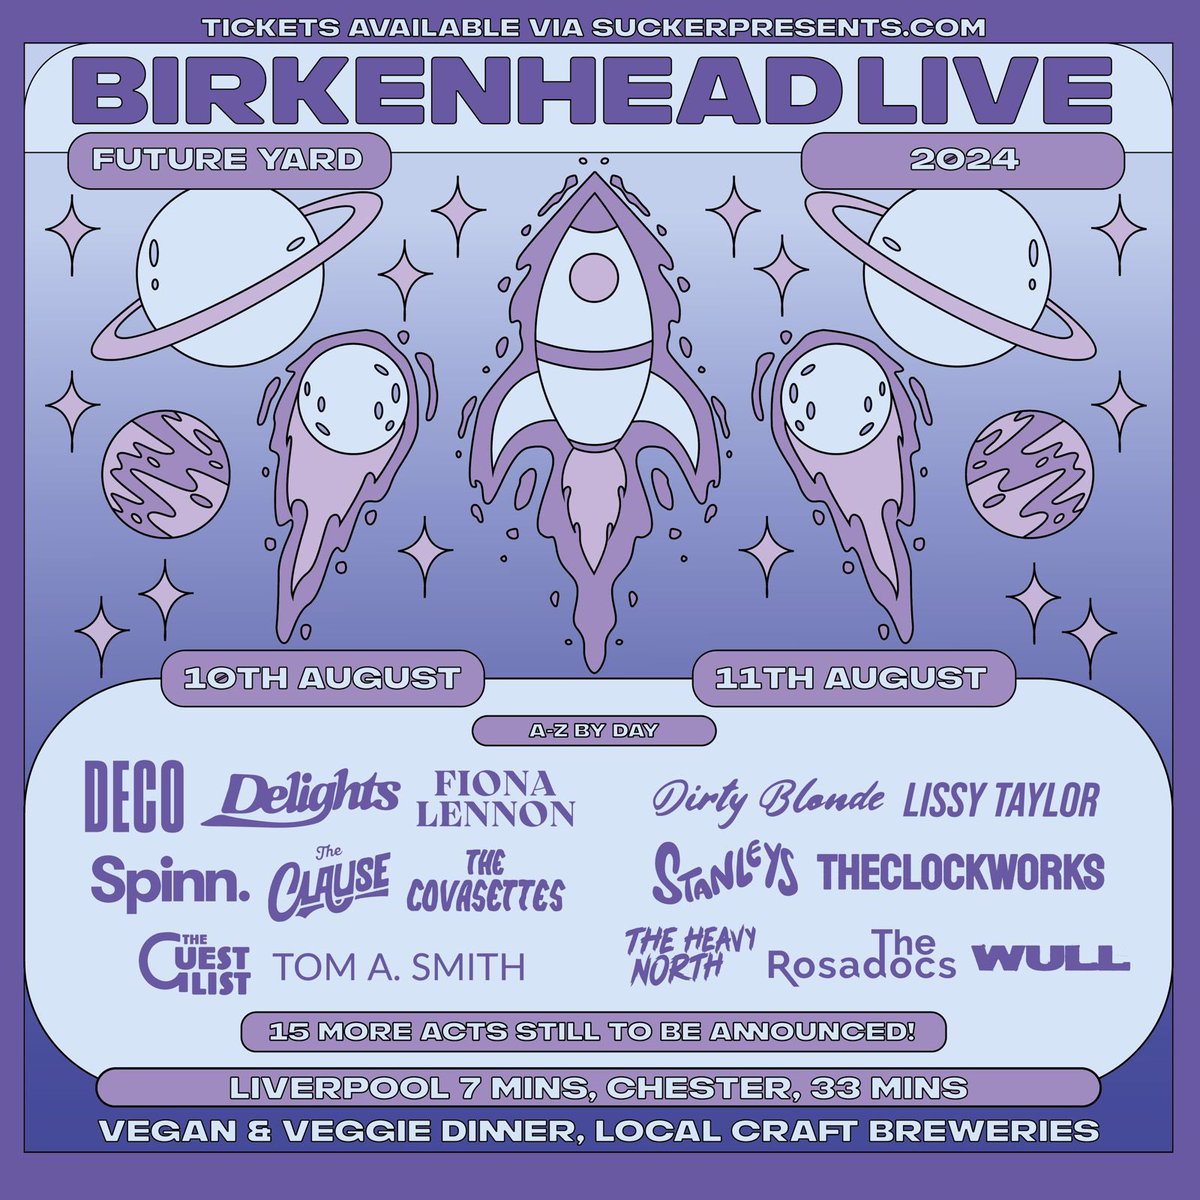 We're gonna need a bigger boat... Pretty stacked line-up for @BirkenheadLive here on the weekend of 10th + 11th August. Another 5 acts added this week, including @spinn_band, @theclauseuk and @wearedirtyblonde. Tickets ⇨birkenheadlive.com